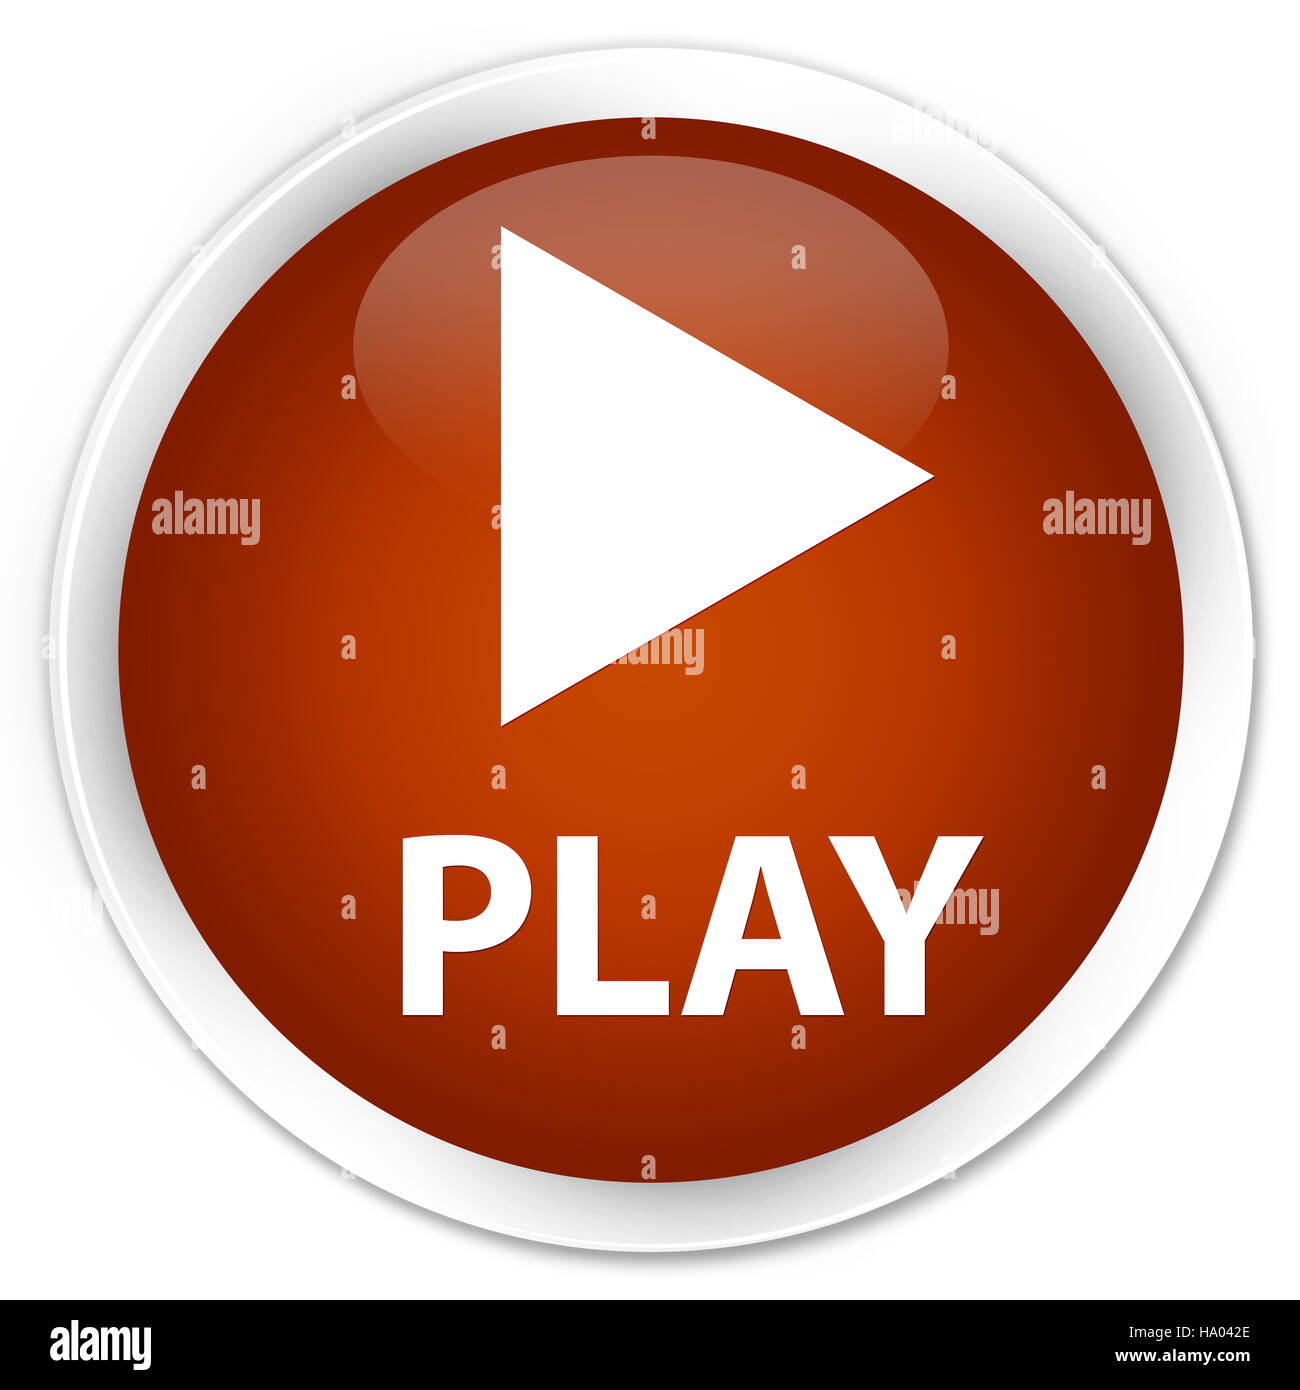 Play isolated on premium brown round button abstract illustration Stock Photo